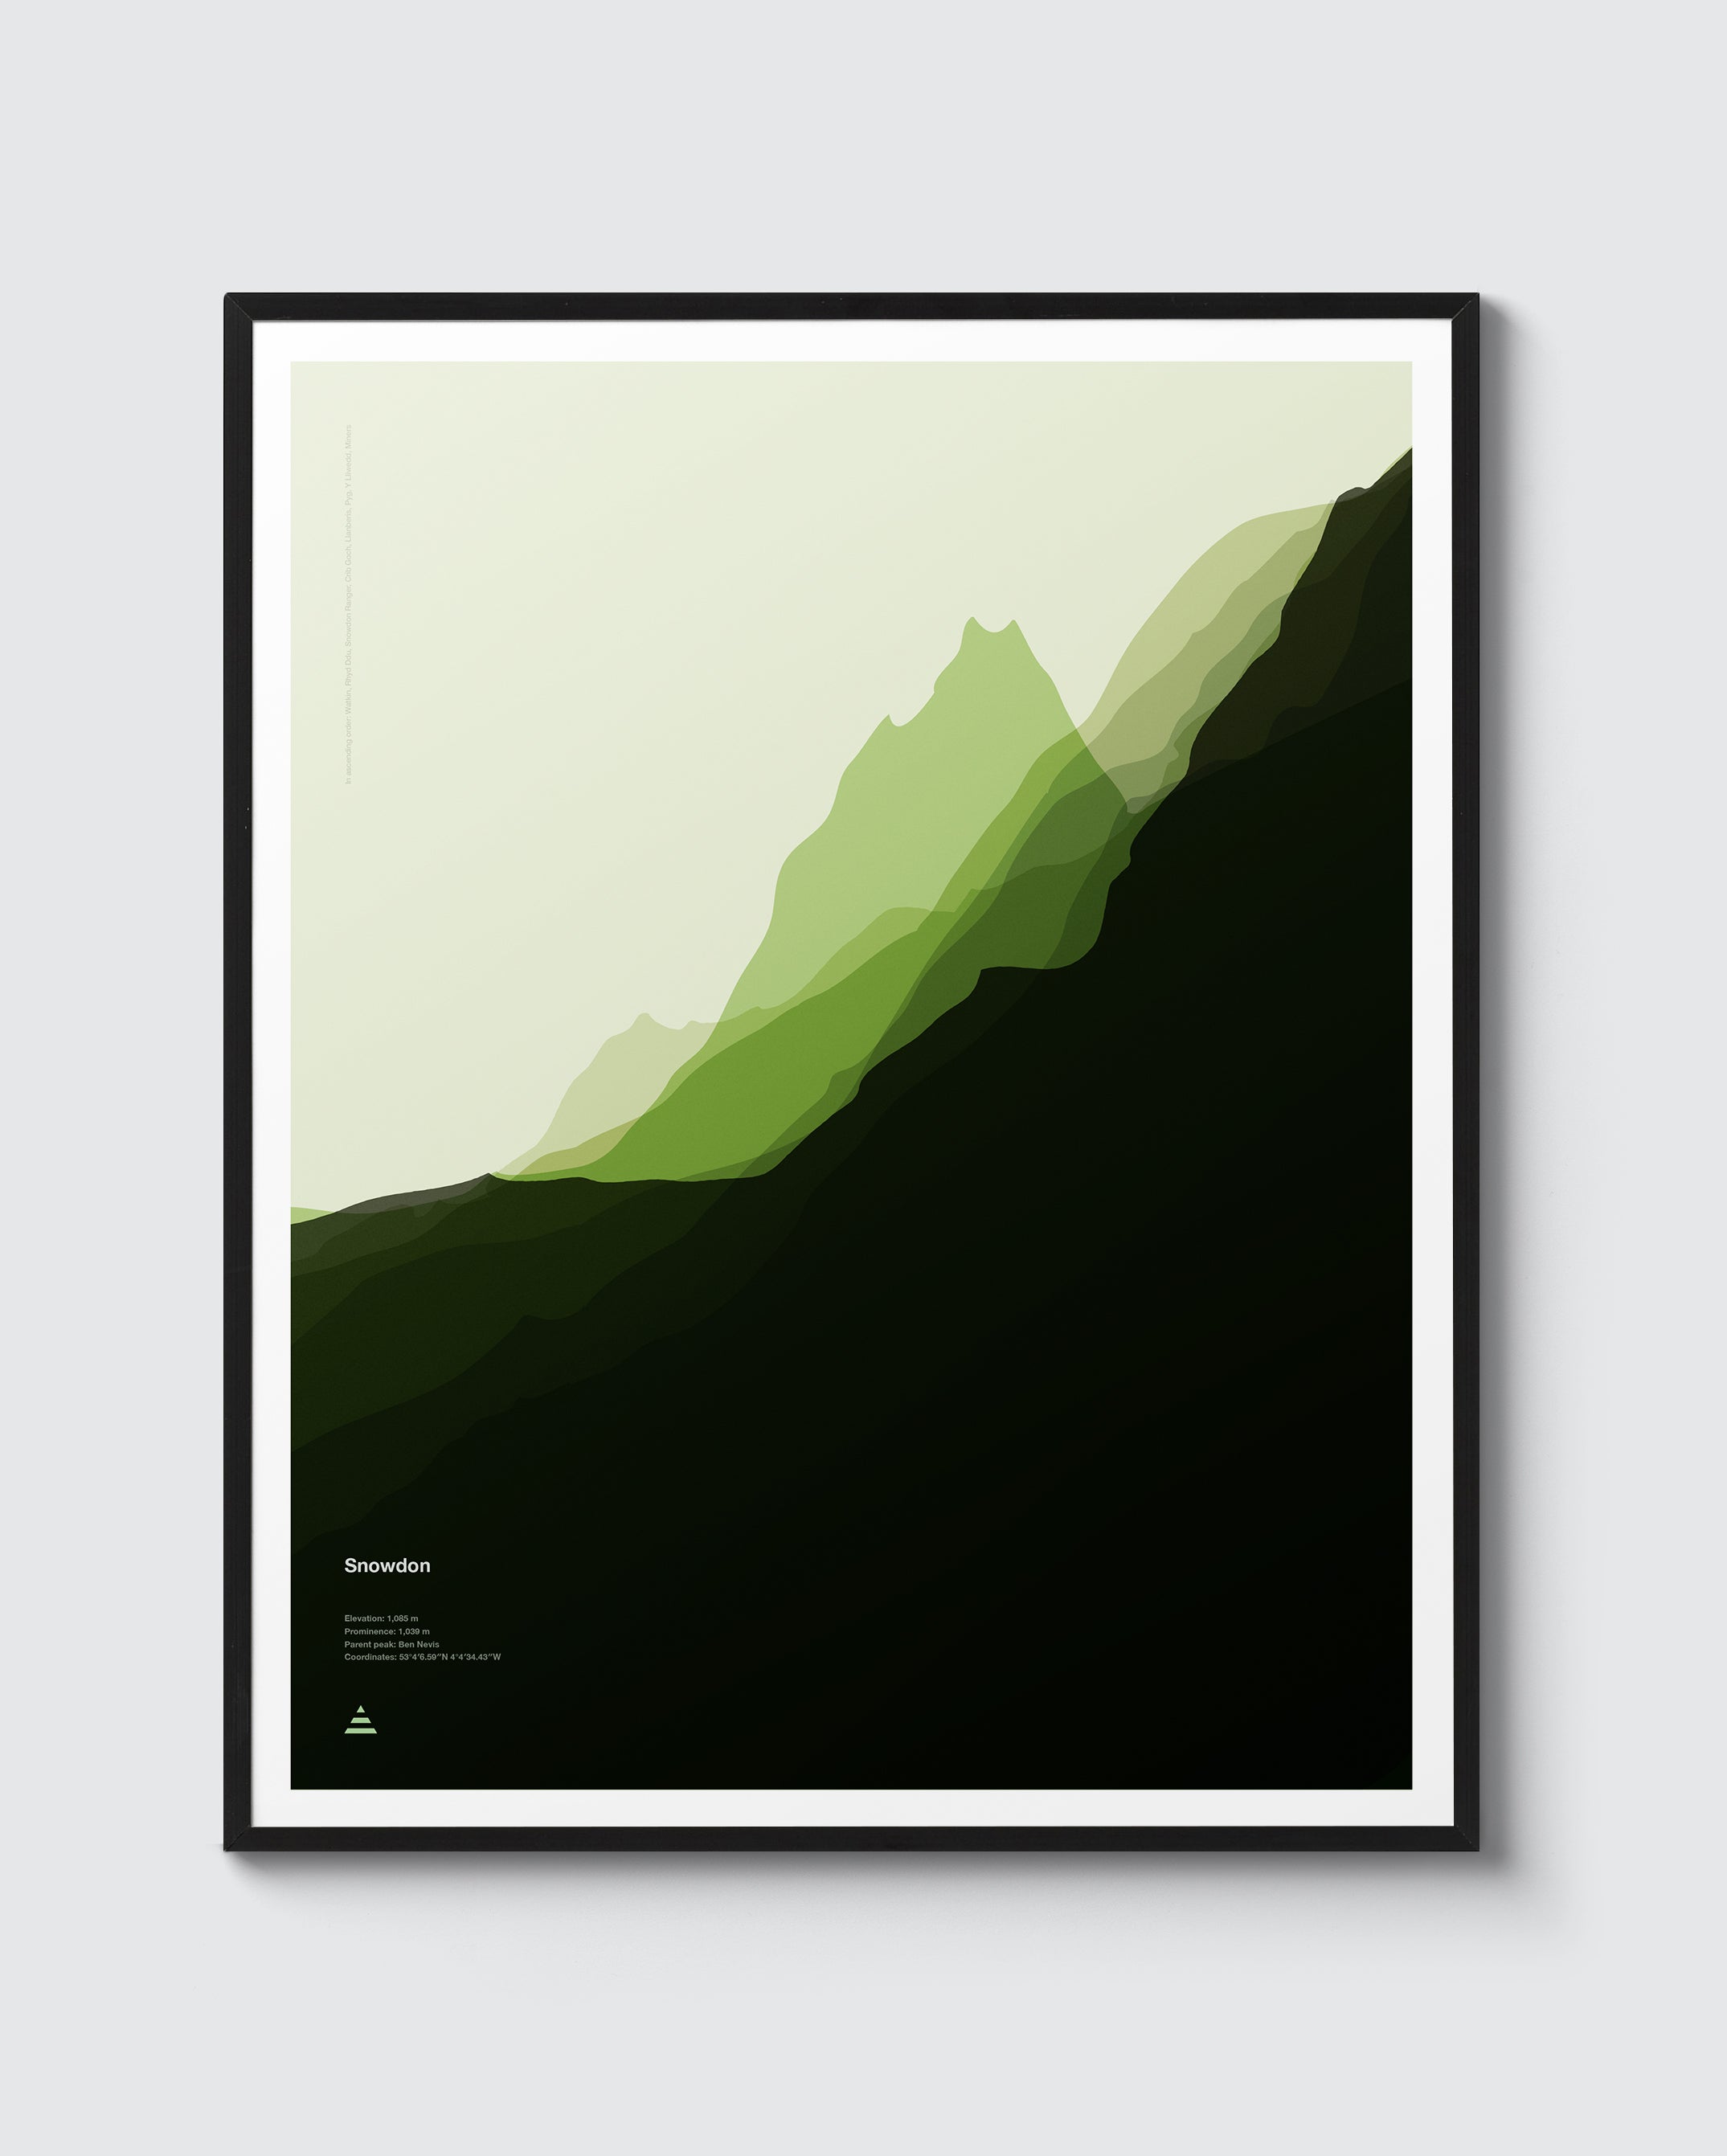 Snowdon Print. Abstract graphical art style landscape, created by overlapping the different routes to the summit